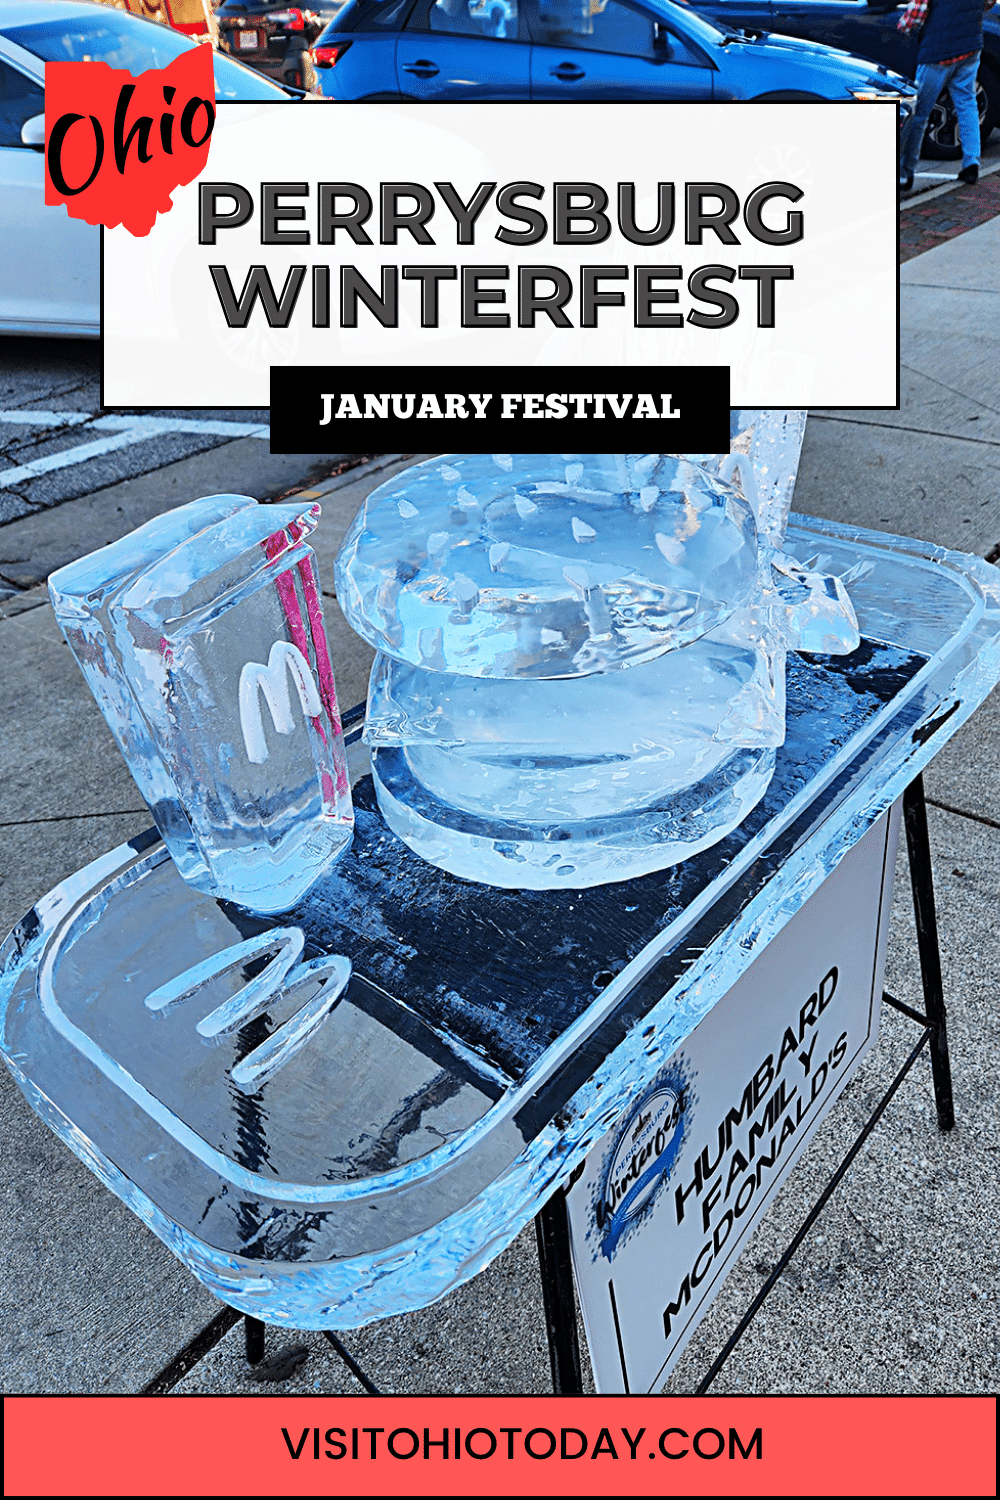 The Perrysburg Winterfest is held on Friday 12th and Saturday 13th January 2024. A weekend of viewing delightful ice sculptures and more family fun.